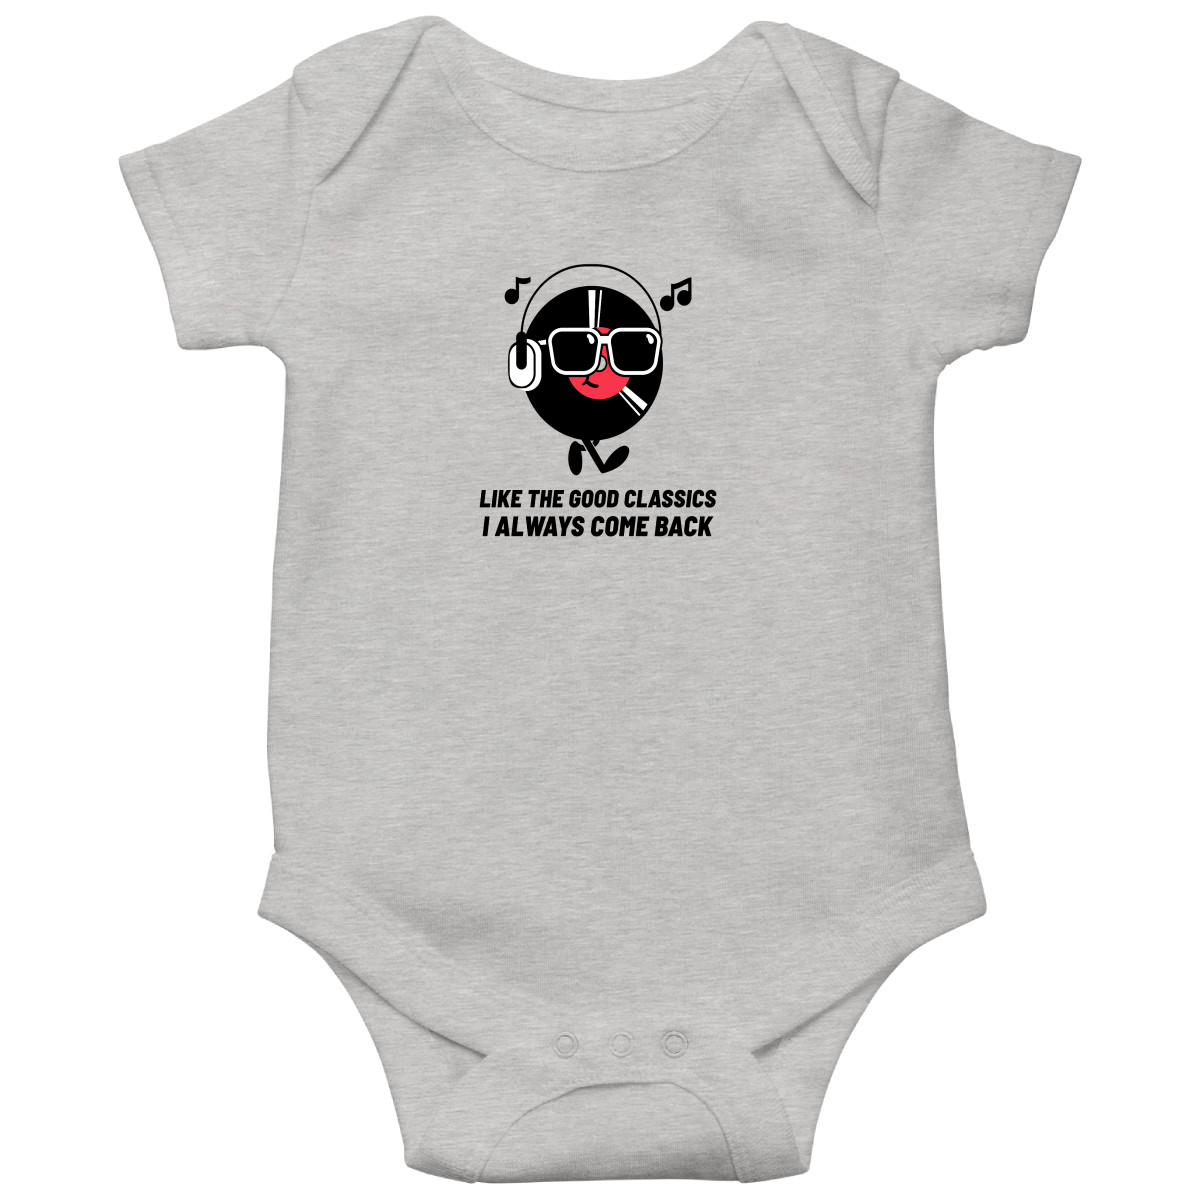 Like a good classic I always come back Baby Bodysuits | Gray